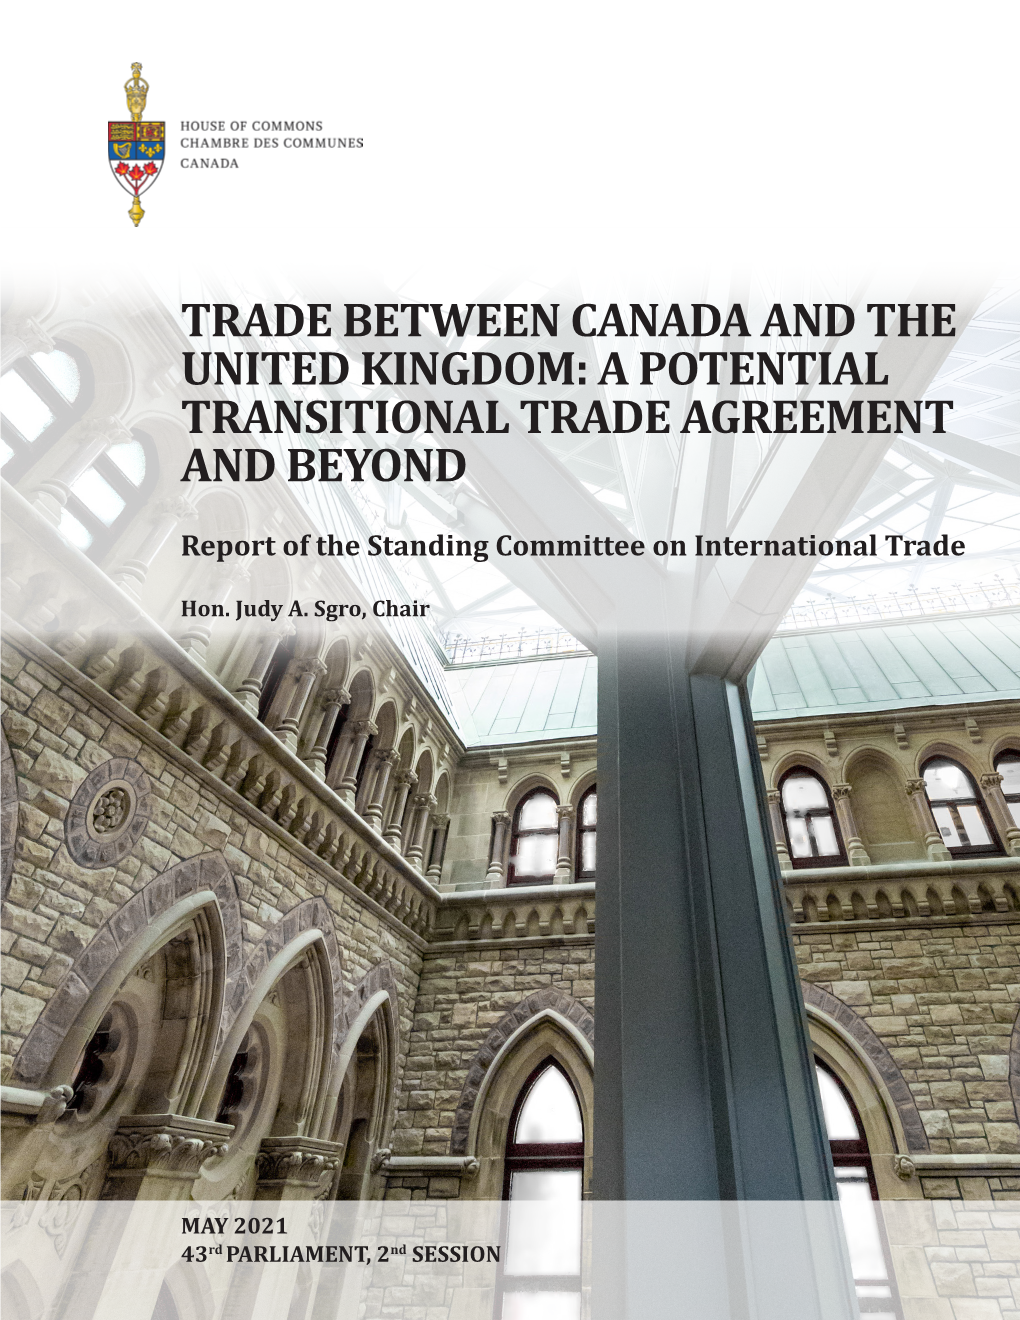 A Potential Transitional Trade Agreement and Beyond